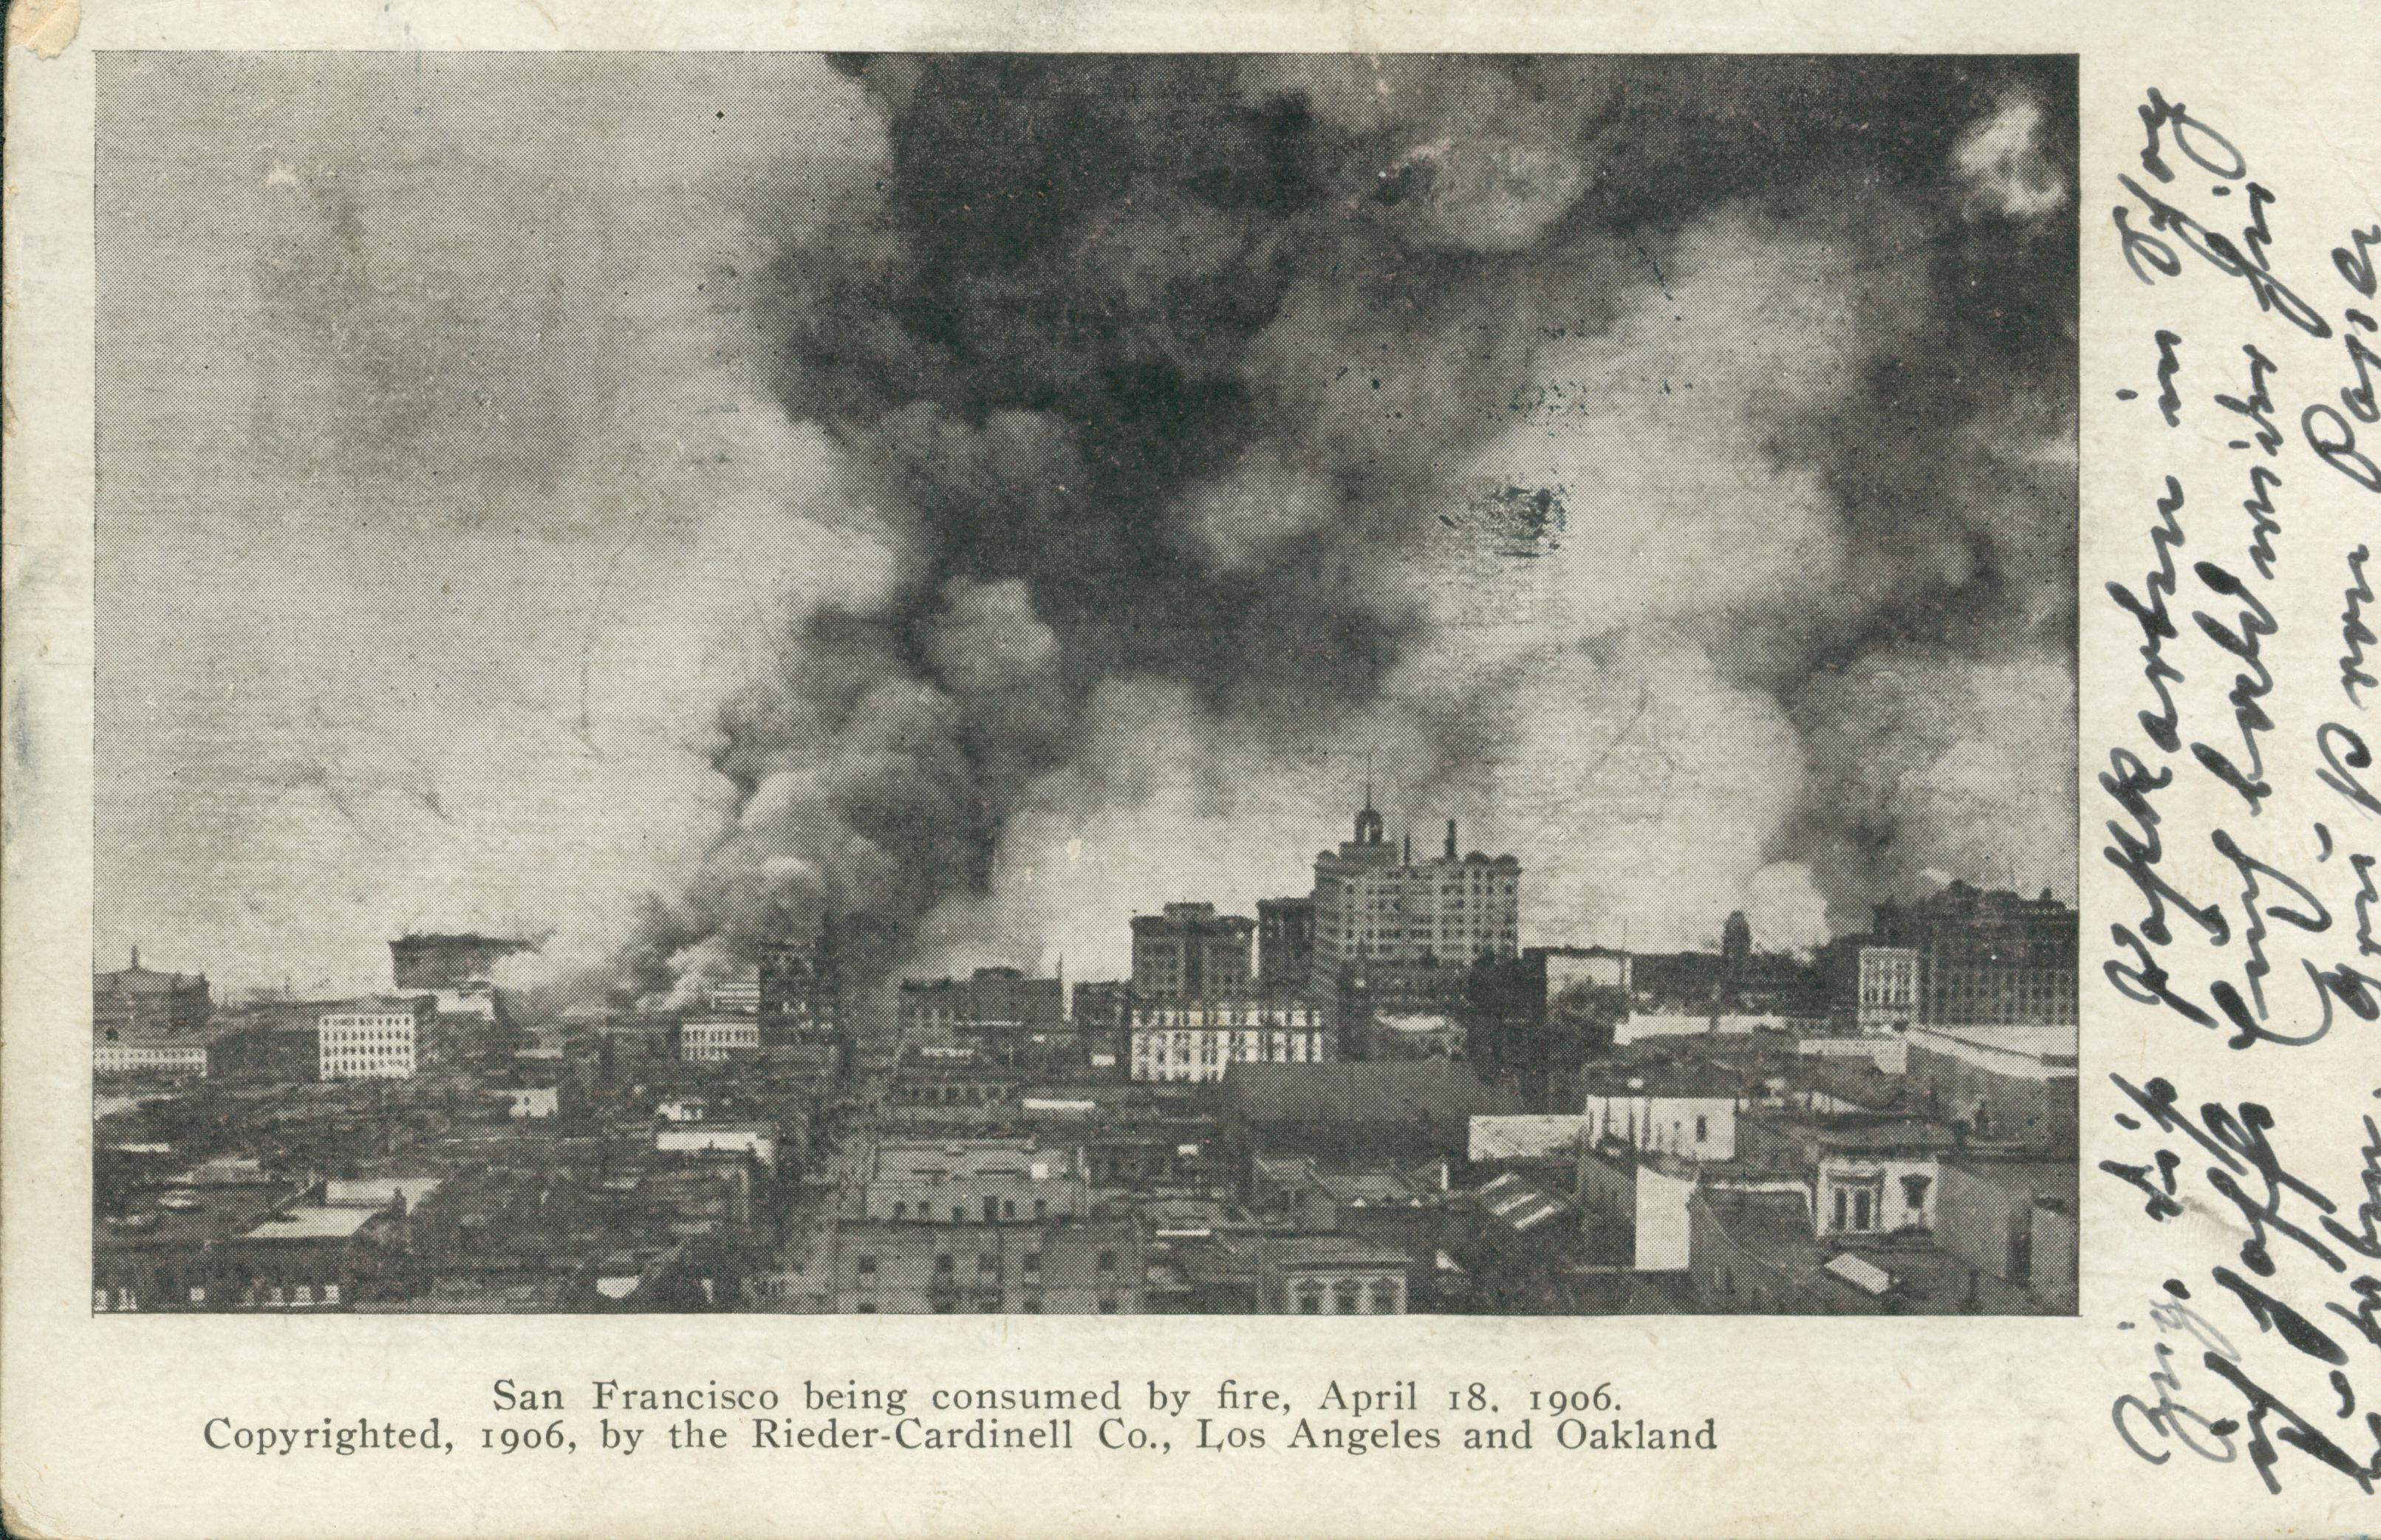 Shows a panoramic view of San Francisco on fire